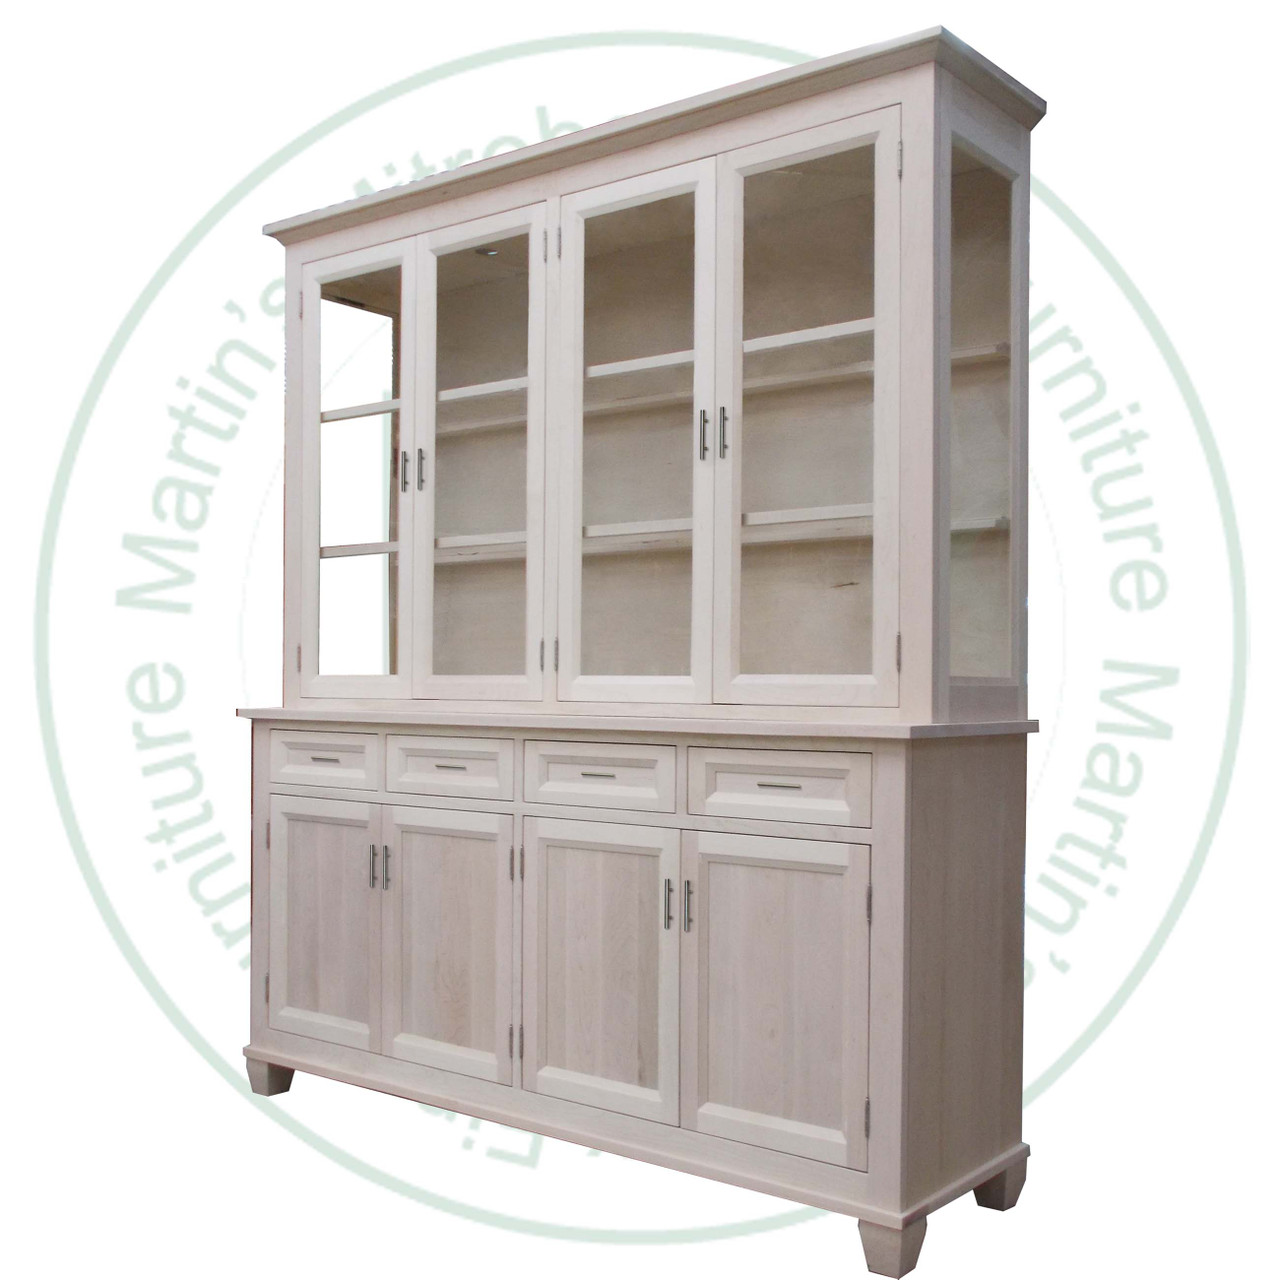 Wormy Maple Algonquin Hutch and Buffet 19'' Deep x 72'' Wide x 82'' High